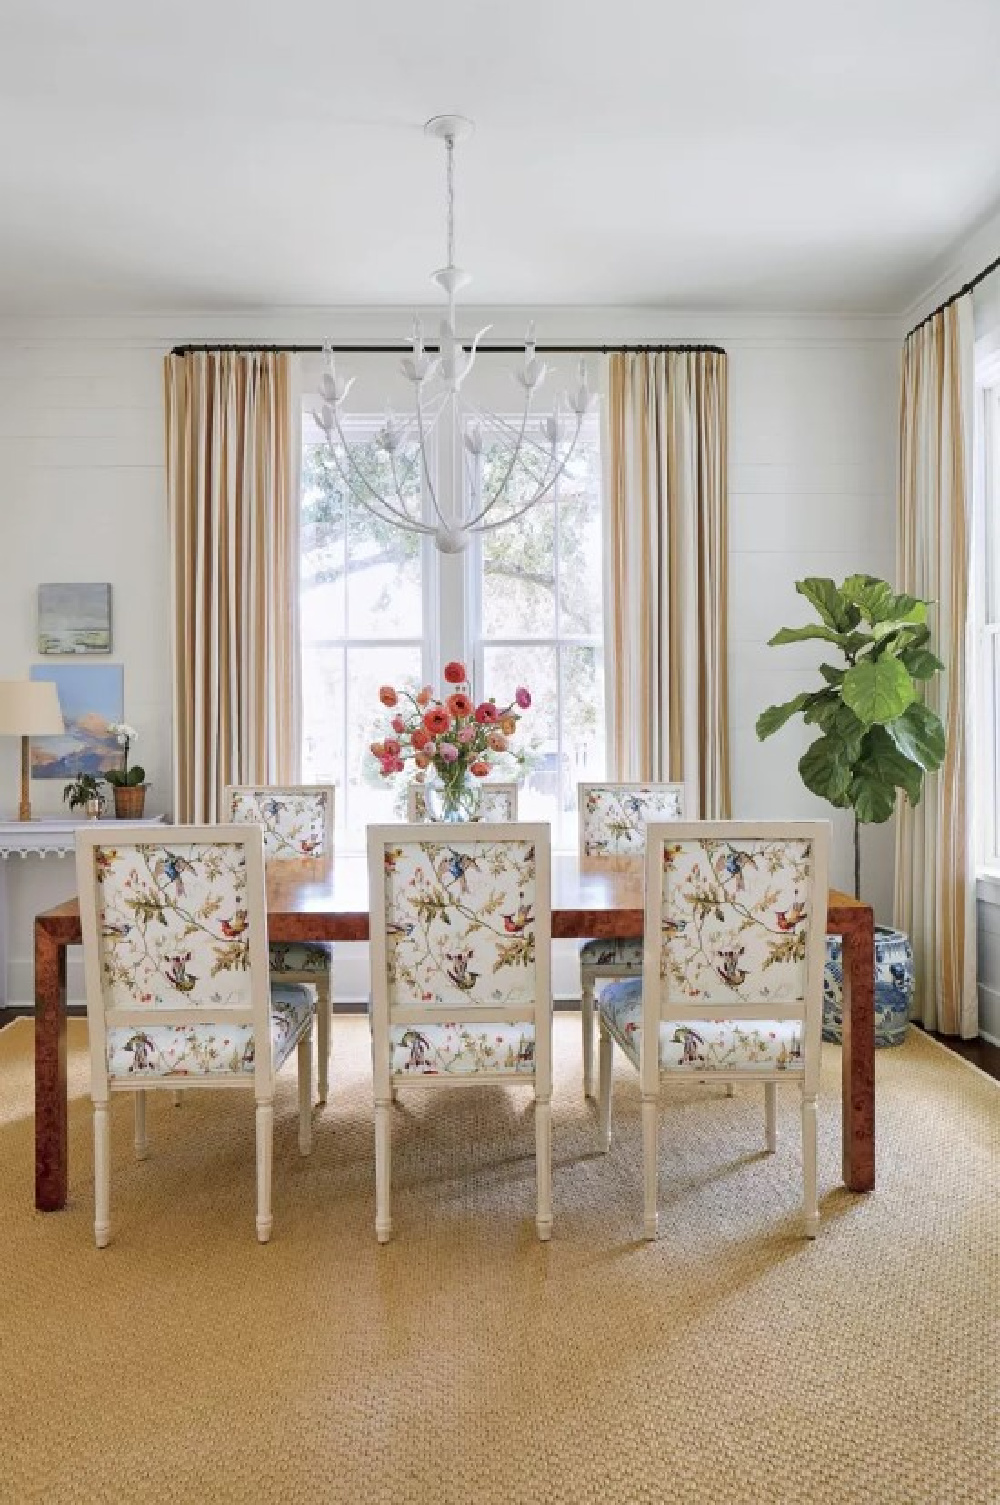 Charming Charleston traditional dining room with modern Parsons table, Ballard Designs chairs upholstered in Cole & Sons - Julia Berolzheimer's home in Southern Living (photo: Hector Manuel Sanchez). #bmsimplywhite